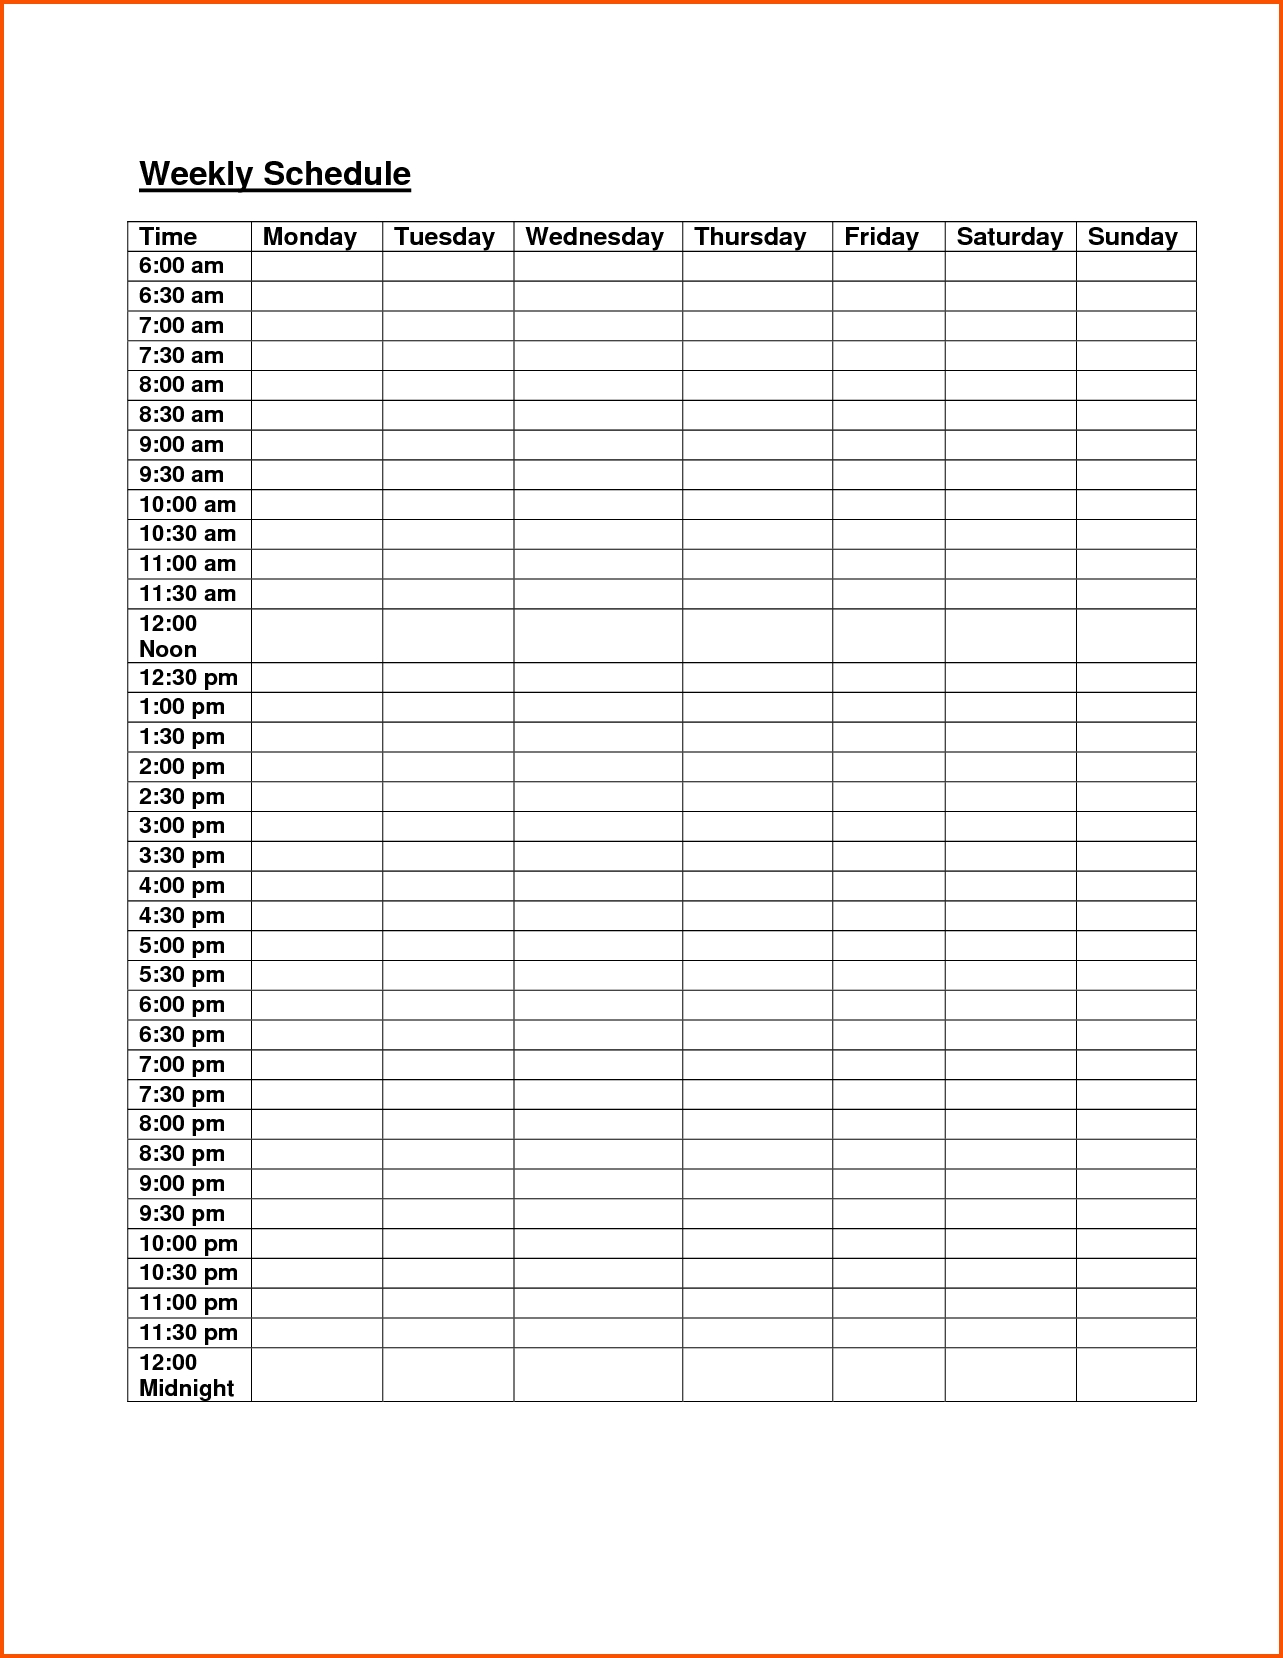 Free Weekly Class Schedule Template Excel #1 | Those Who Can, Teach in Printable Blank Hourly Income Worksheet